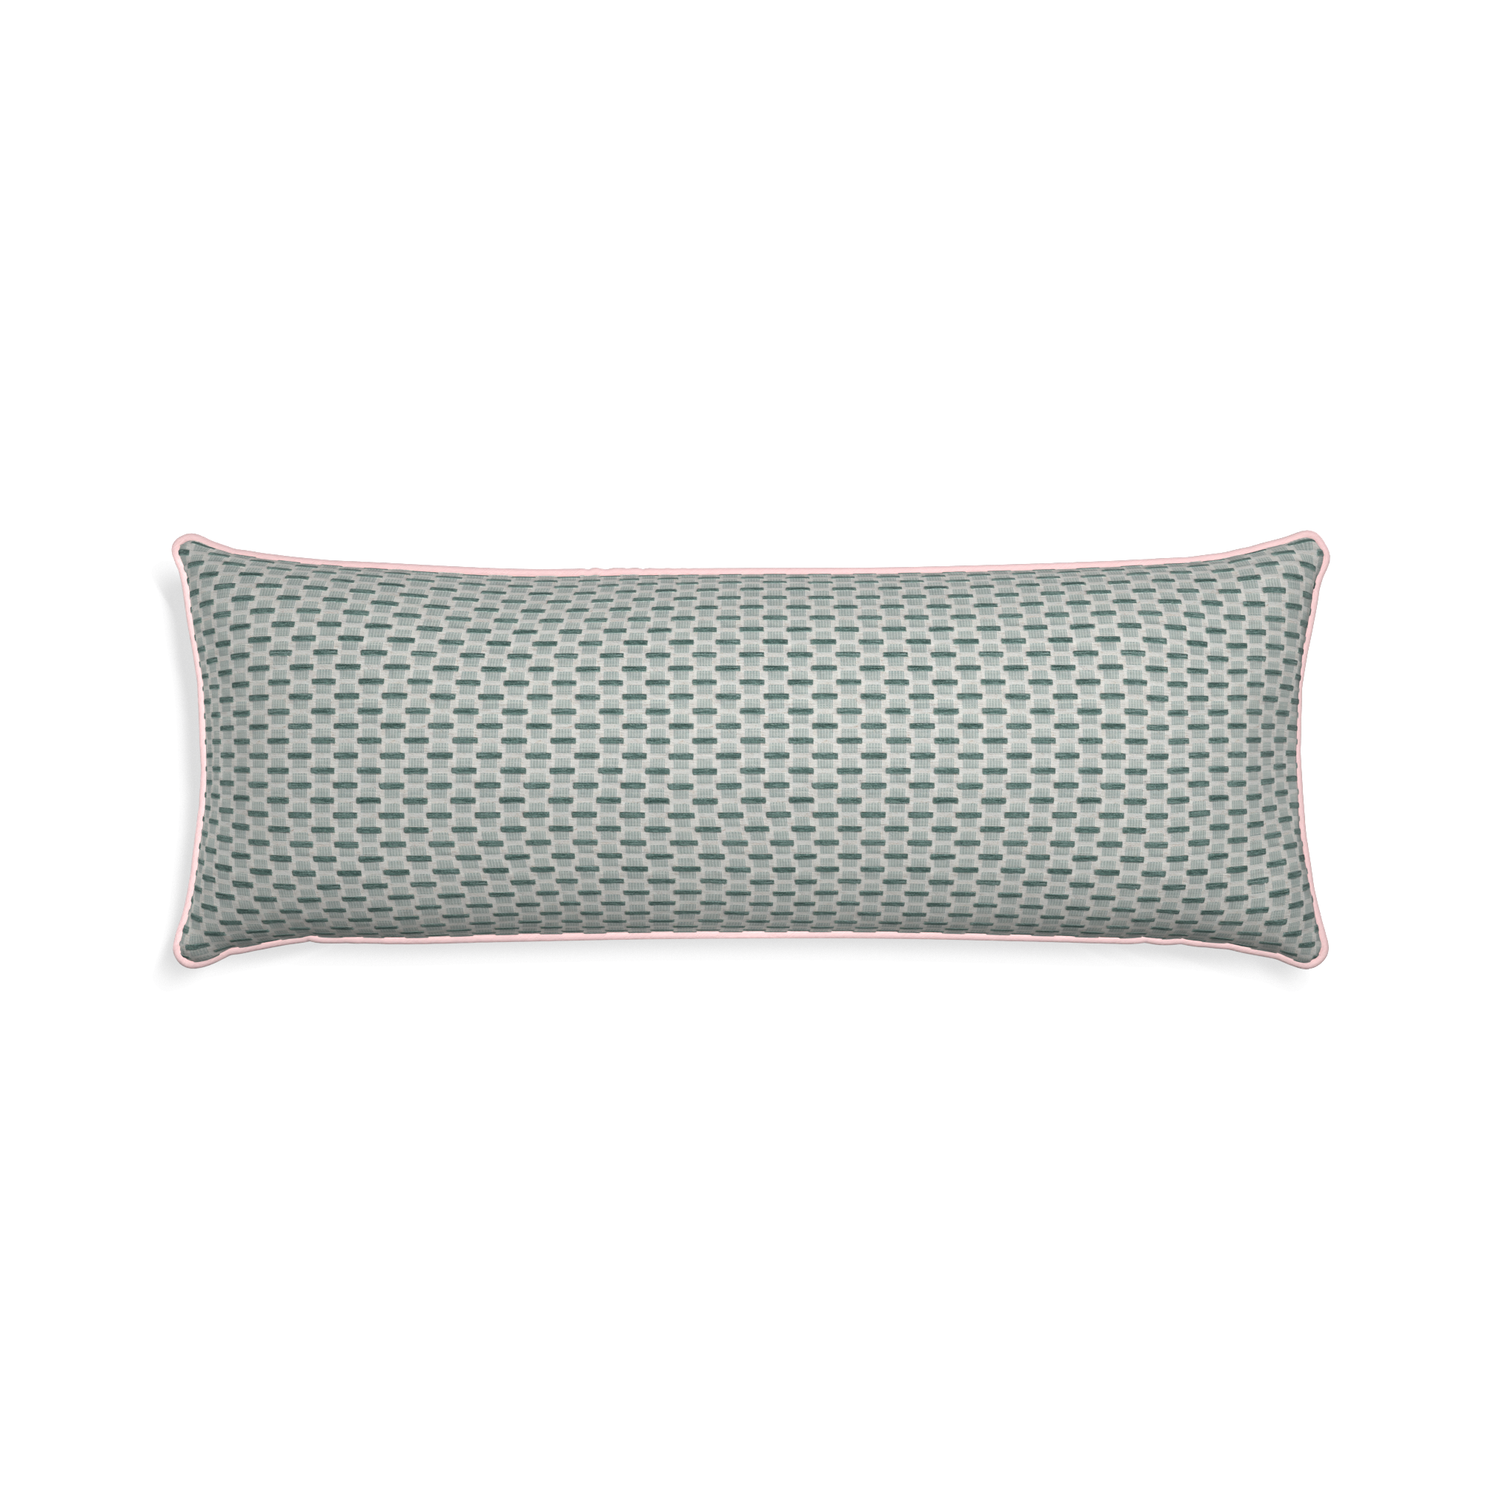 Xl-lumbar willow mint custom green geometric chenillepillow with petal piping on white background